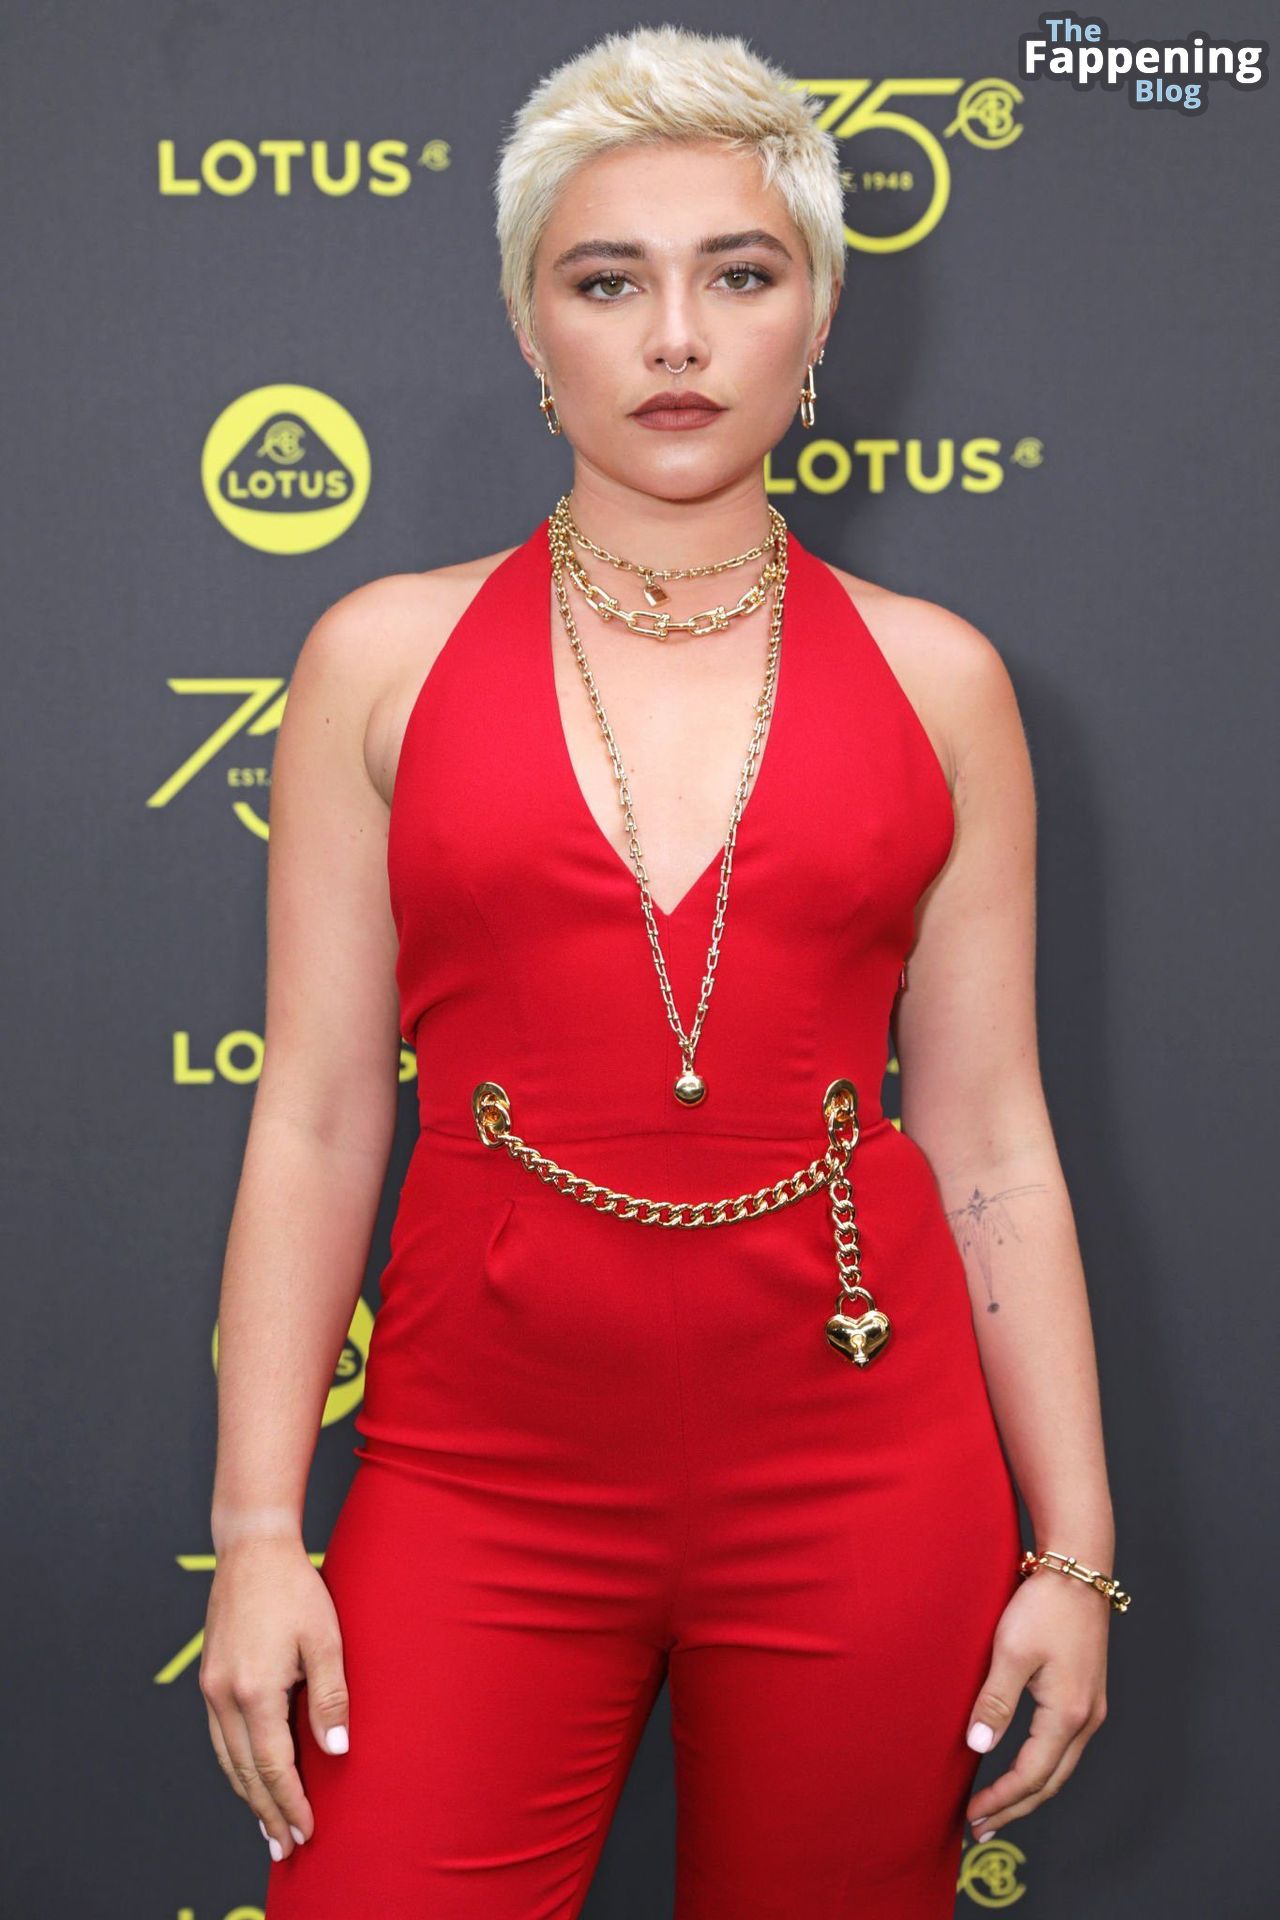 Florence-Pugh-Sexy-The-Fappening-Blog-46-1.jpg